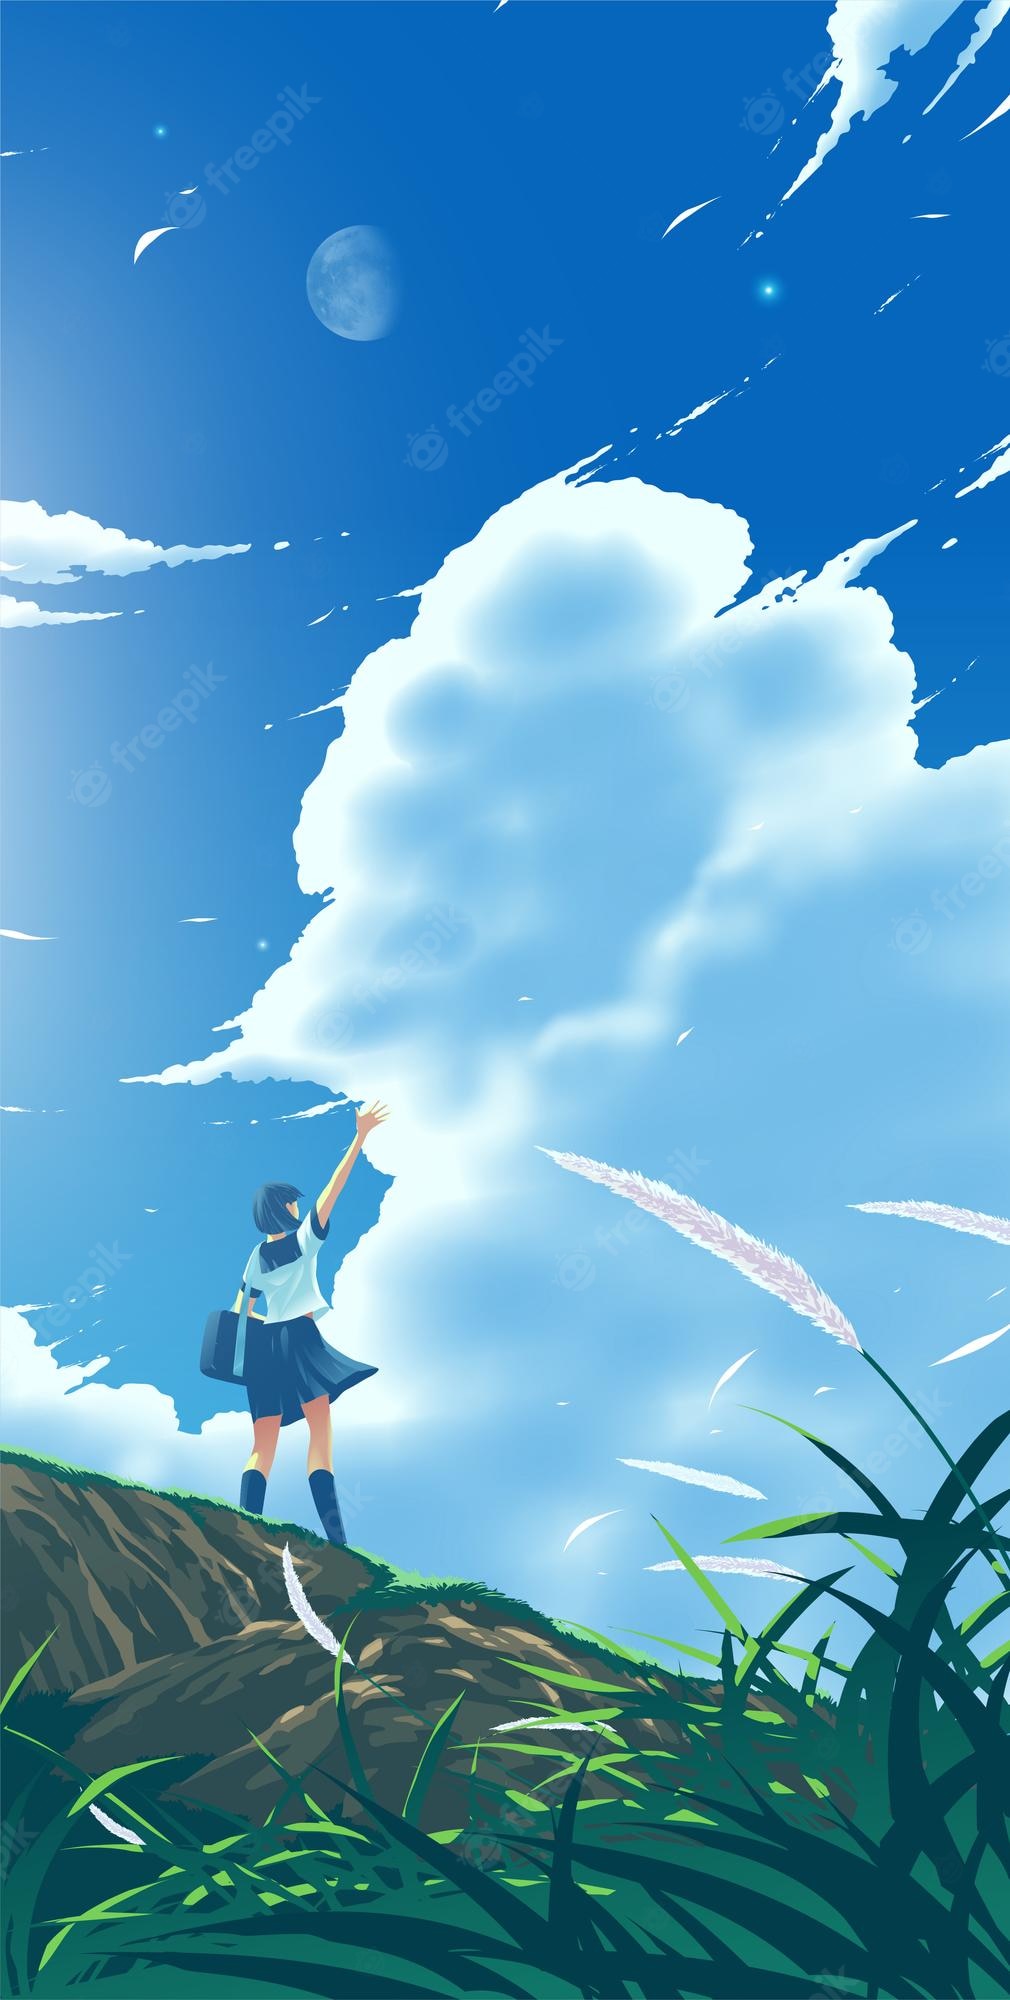 Premium Vector. A japanese high school girl waving on a hill under the bright blue sky with the moon